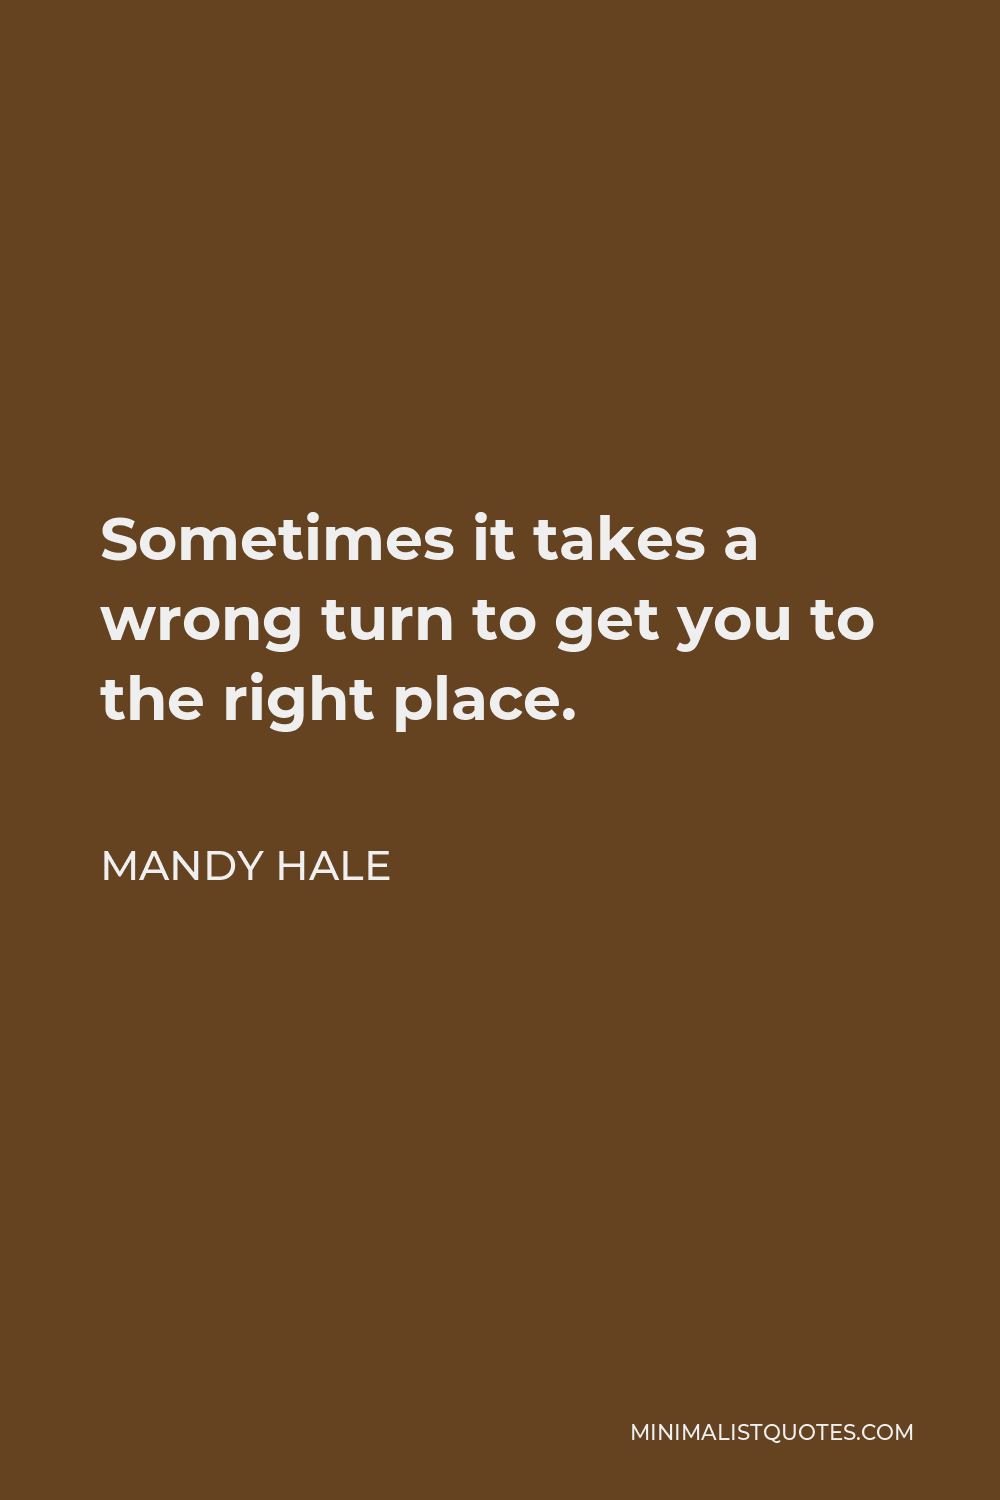 Mandy Hale Quote - Sometimes it takes a wrong turn to get you to the right place.